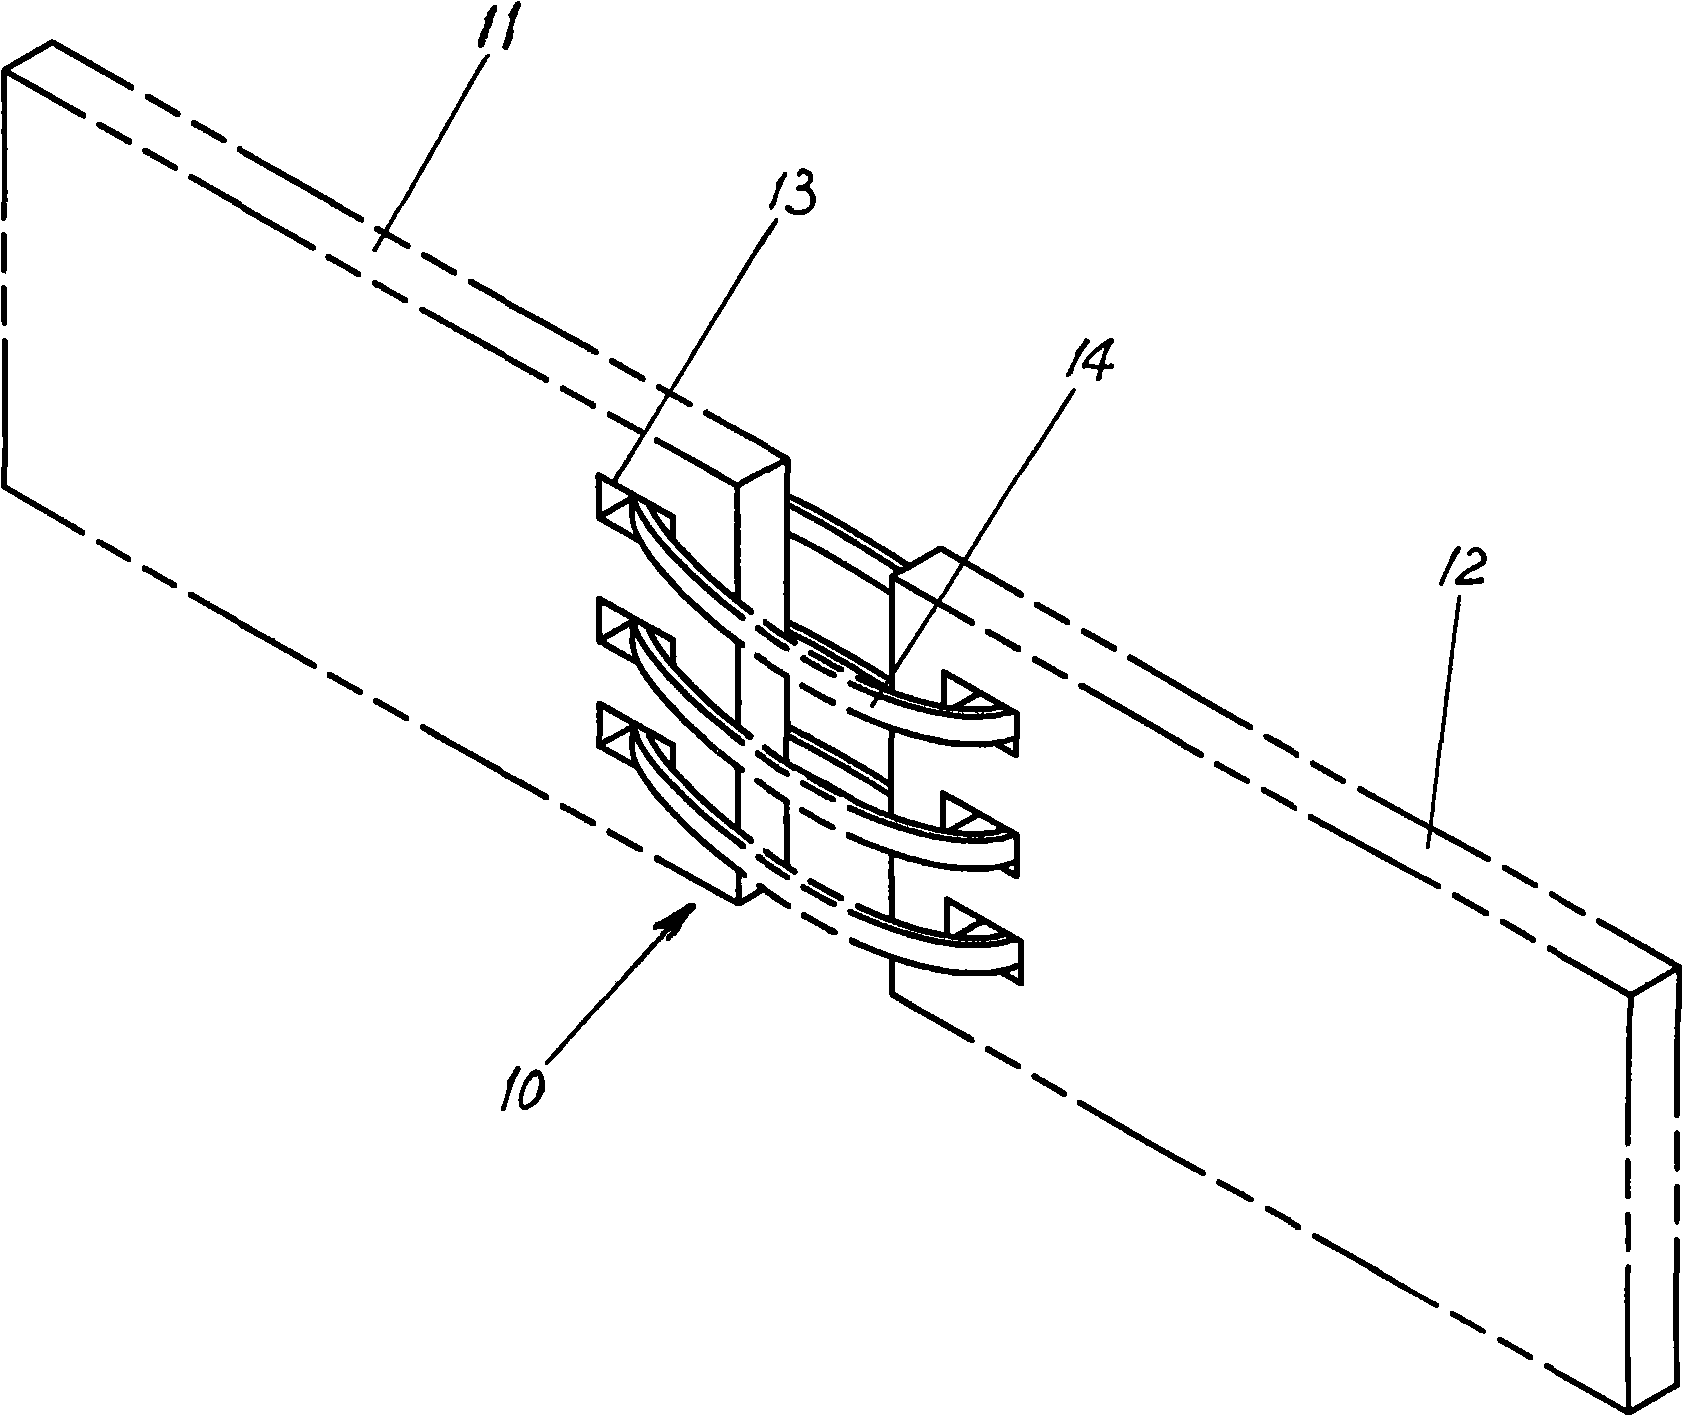 Connection method for titanium plate and stainless steel plate